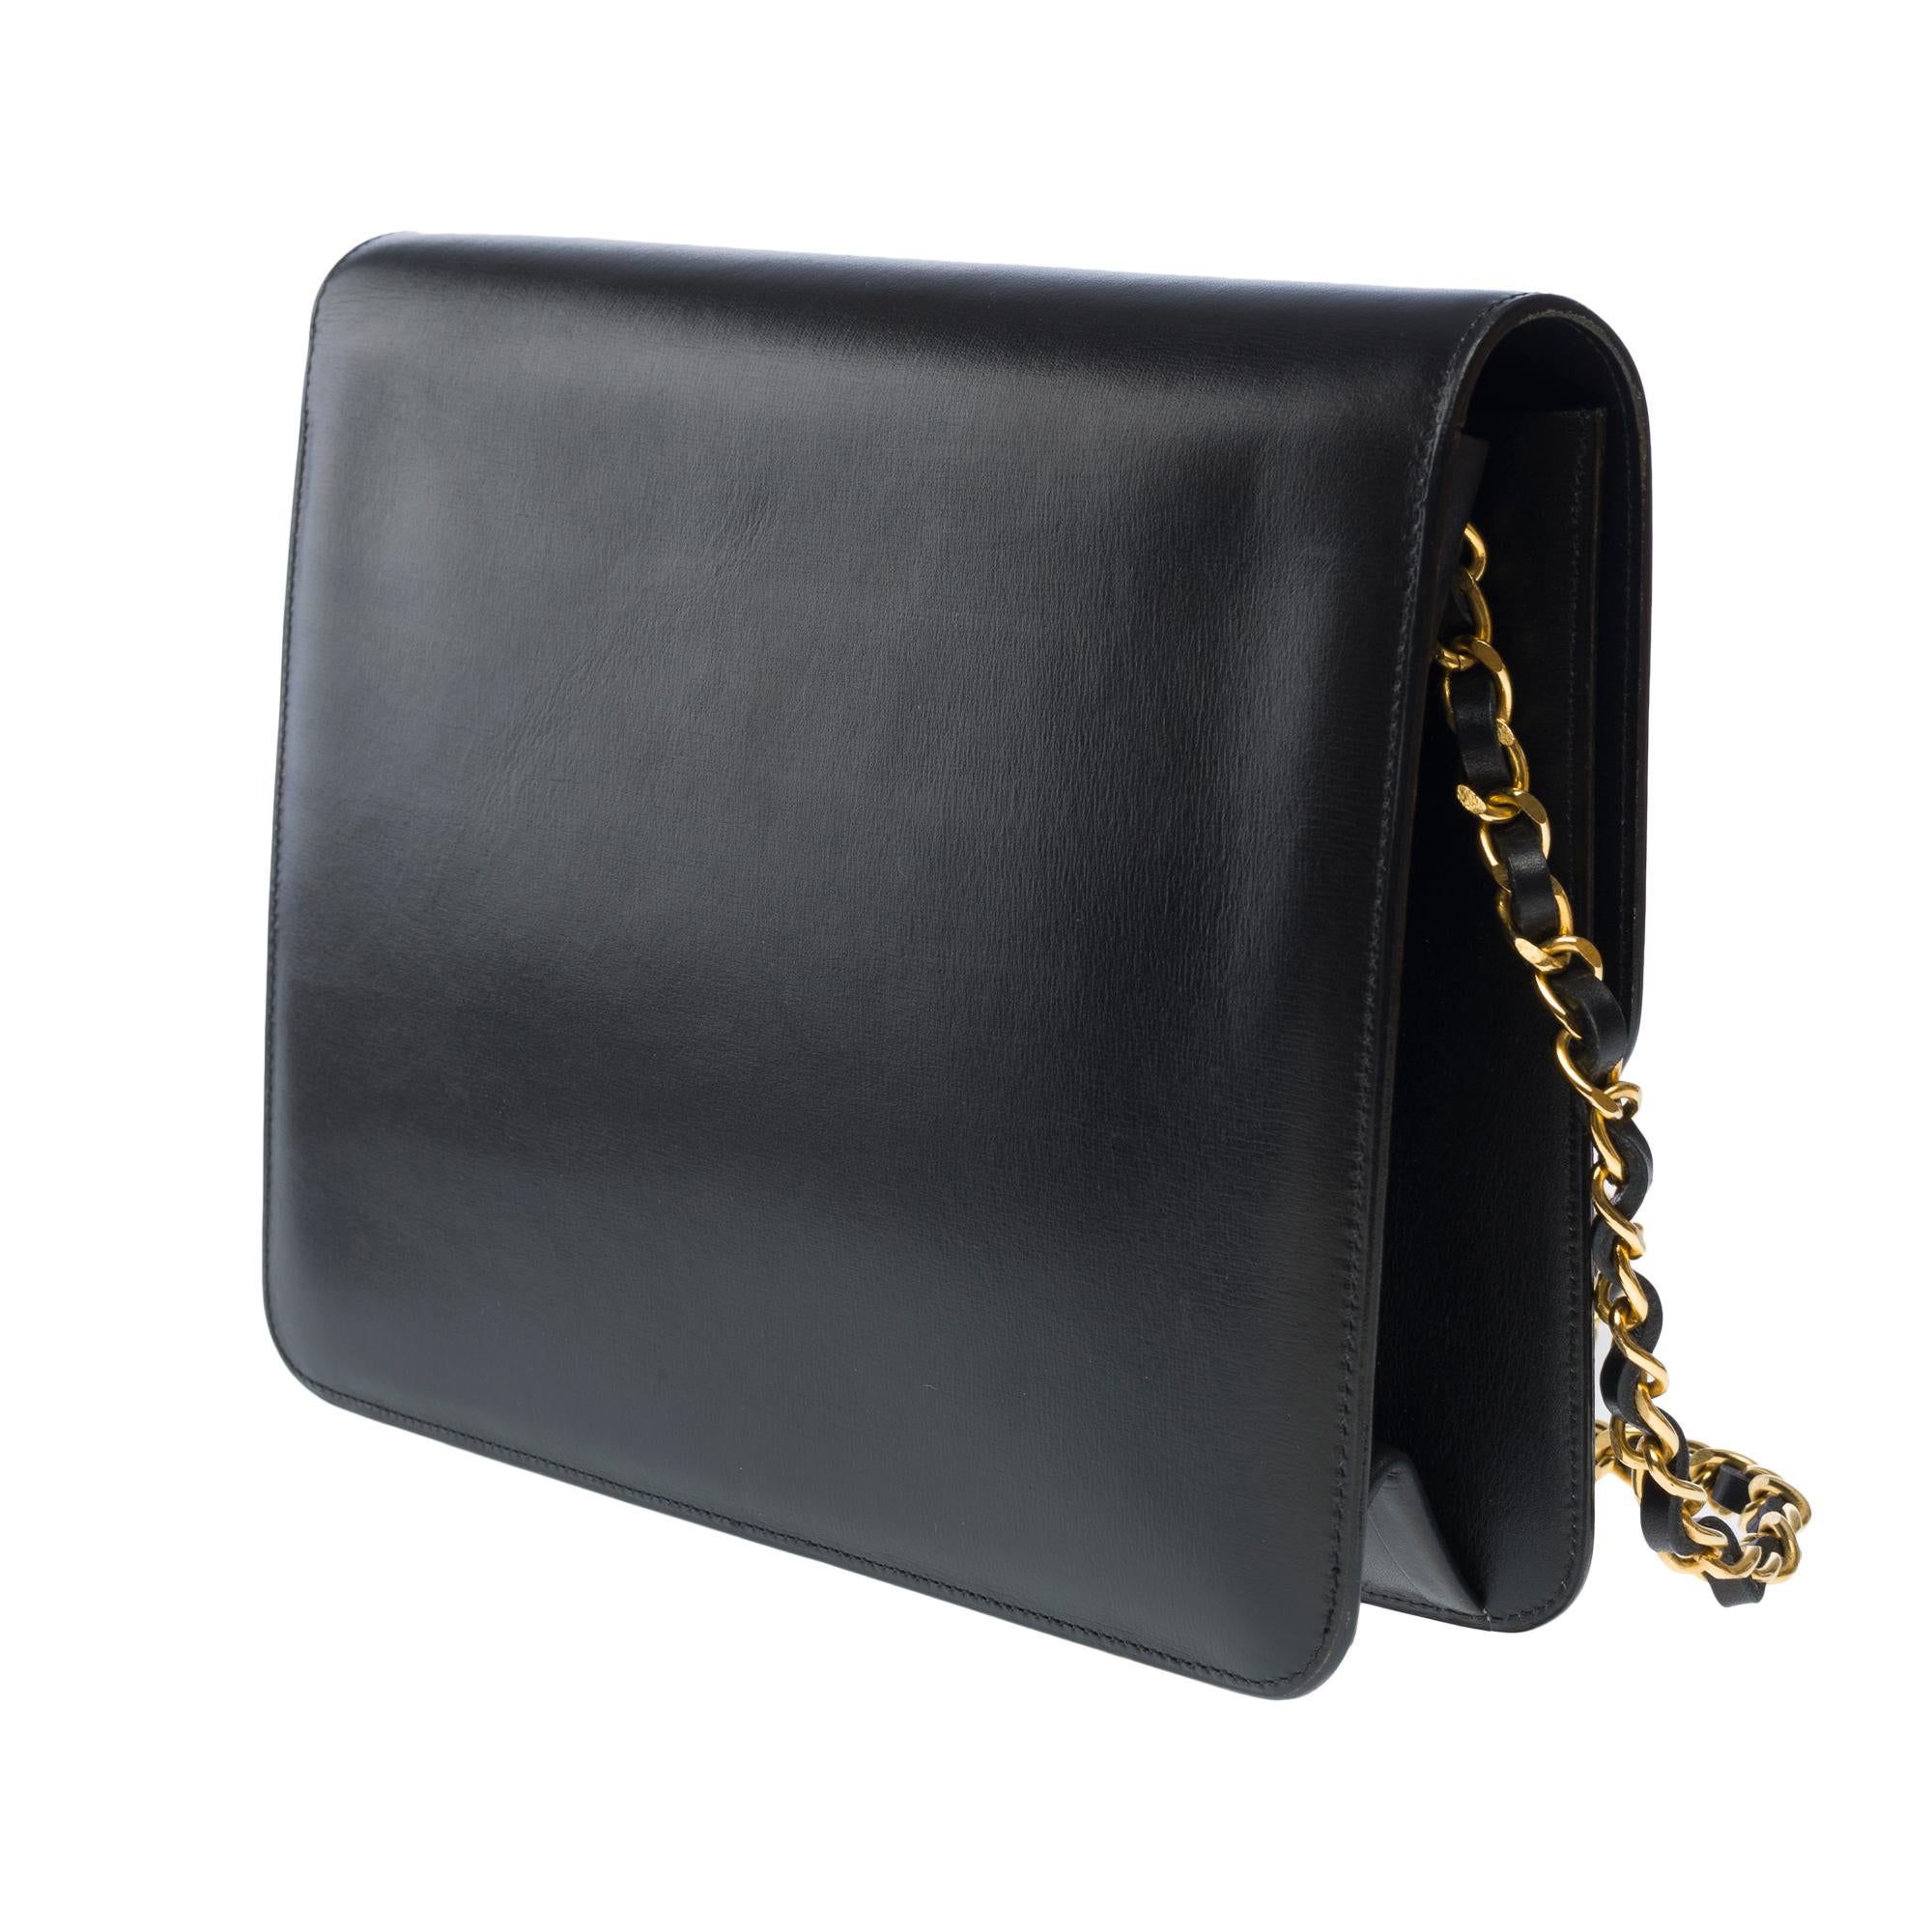 Gorgeous Chanel Classic shoulder flap bag in black box calfskin leather, GHW 10